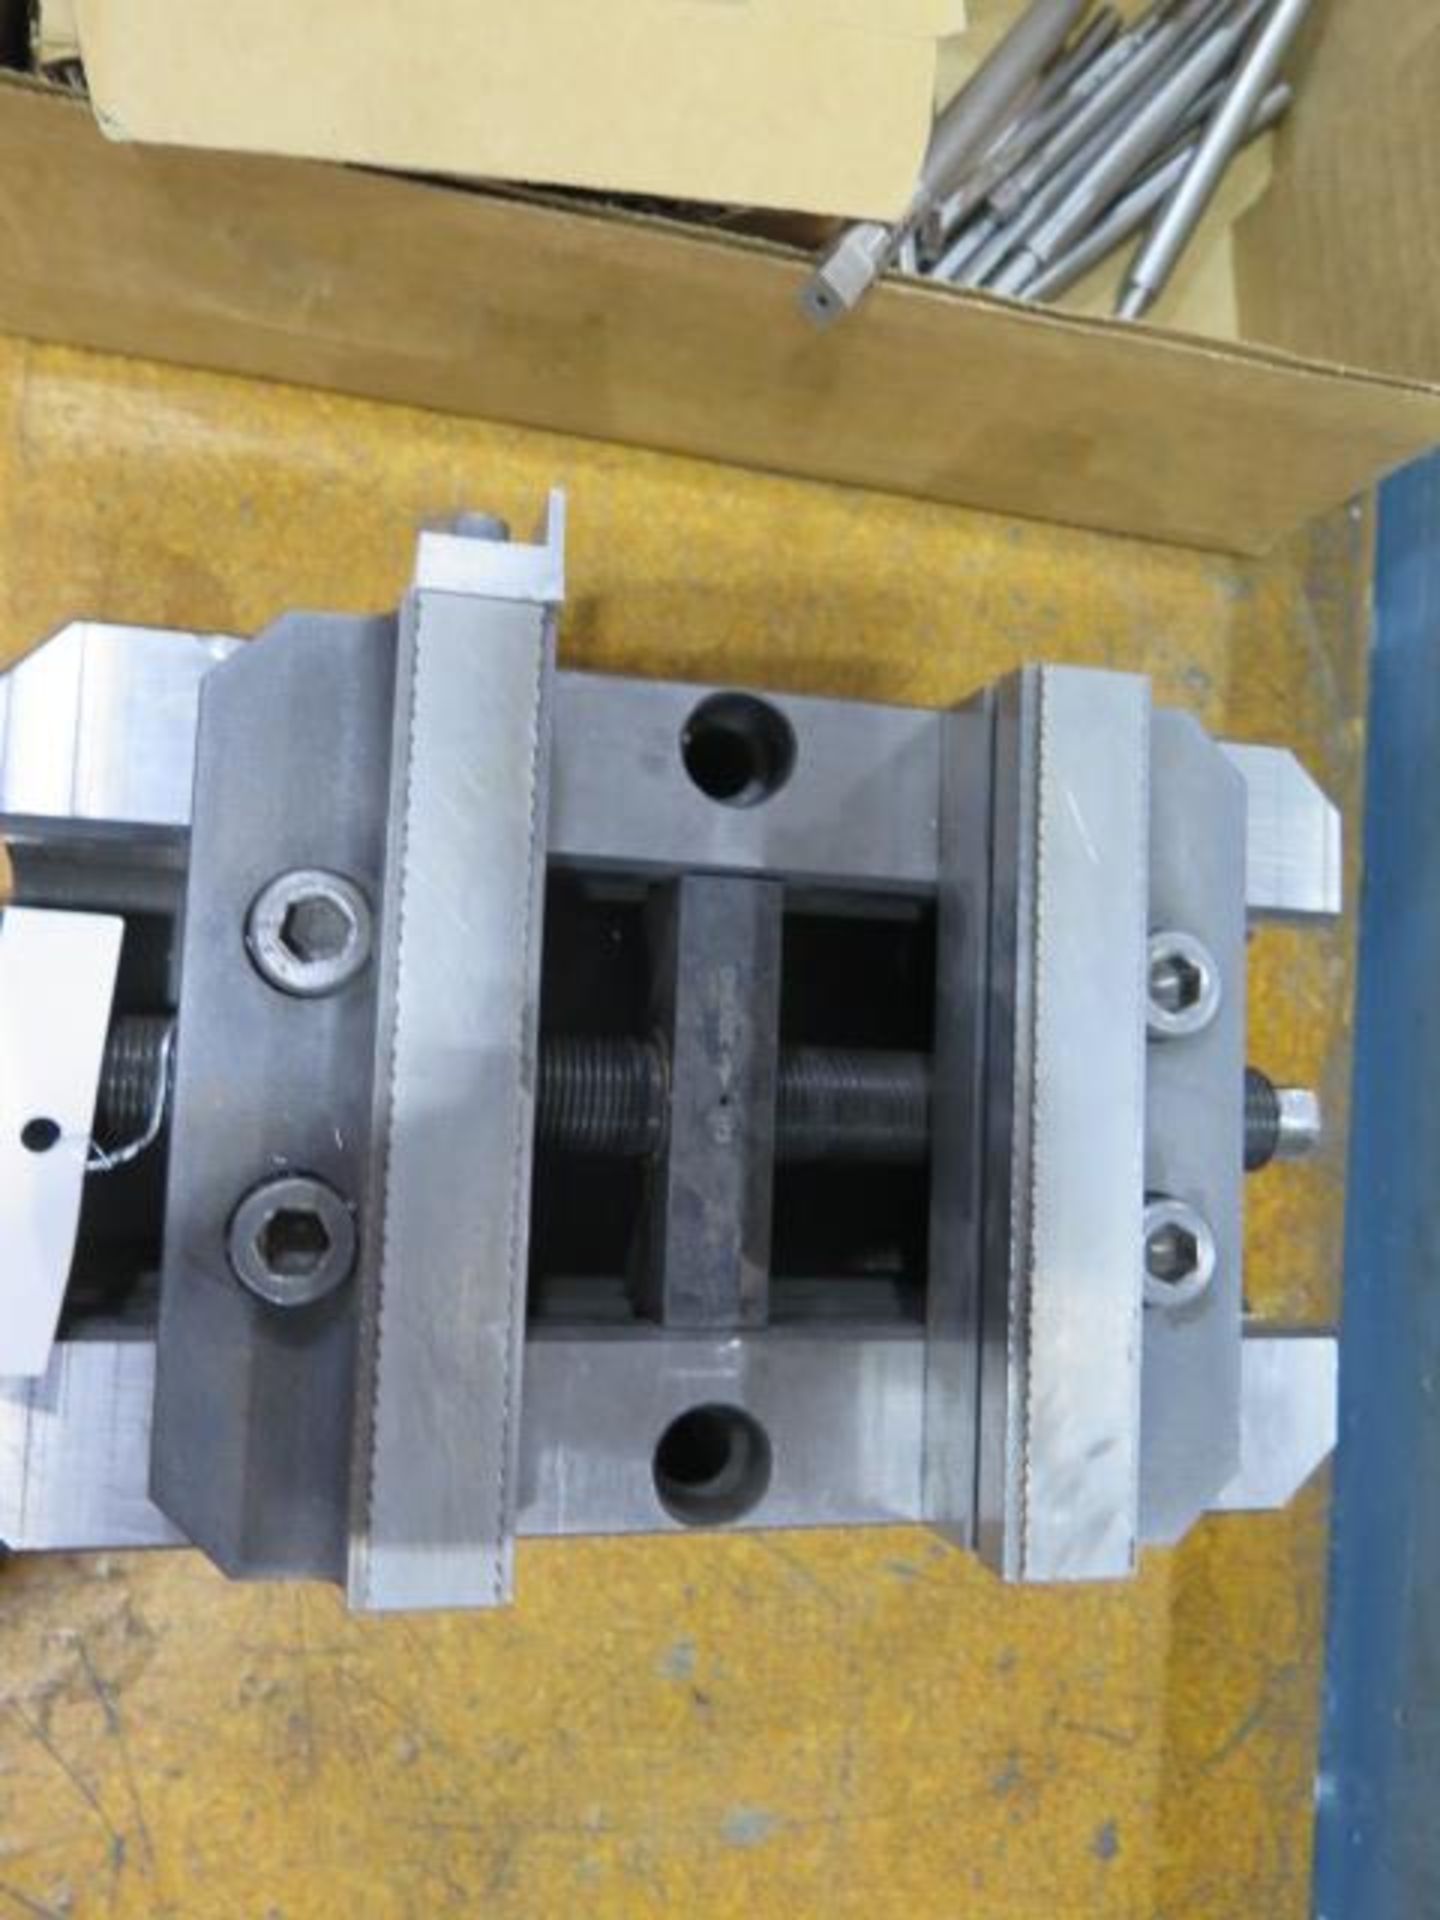 5th Axis V6105 6" Vise (SOLD AS-IS - NO WARRANTY) - Image 2 of 5